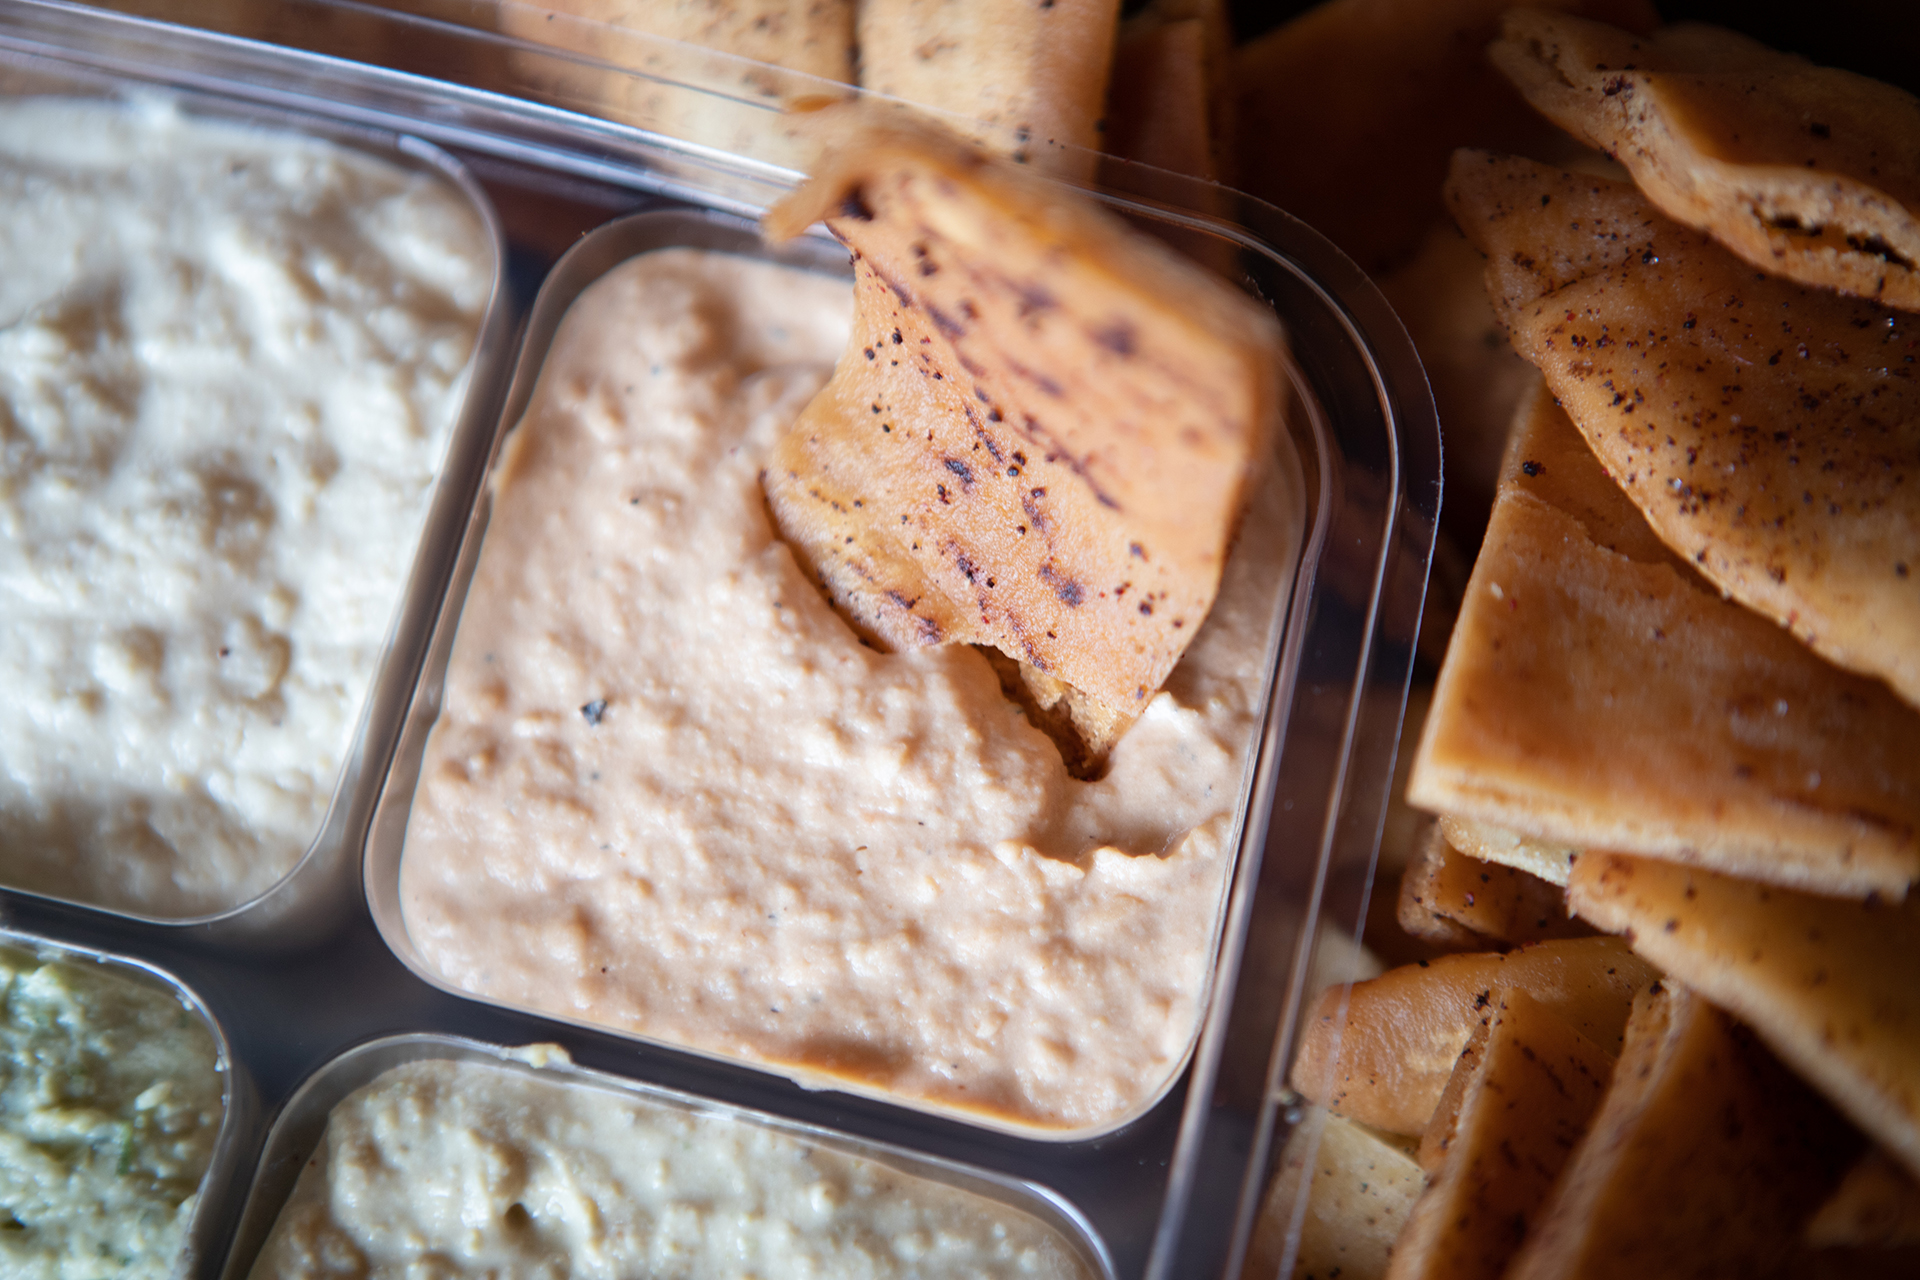 The Party Pack is pictured in a square container with four side orders of our signature Hummus flavors, Classic Hummus, Cilantro Jalapeño Hummus, Roasted Tomato Habanero Hummus, and Cumin Lime Hummus. A single Pita Chip is depicted dipped inside of the Roasted Tomato Habanero Hummus. The Party Pack container is surrounded by fresh fried pita chips.